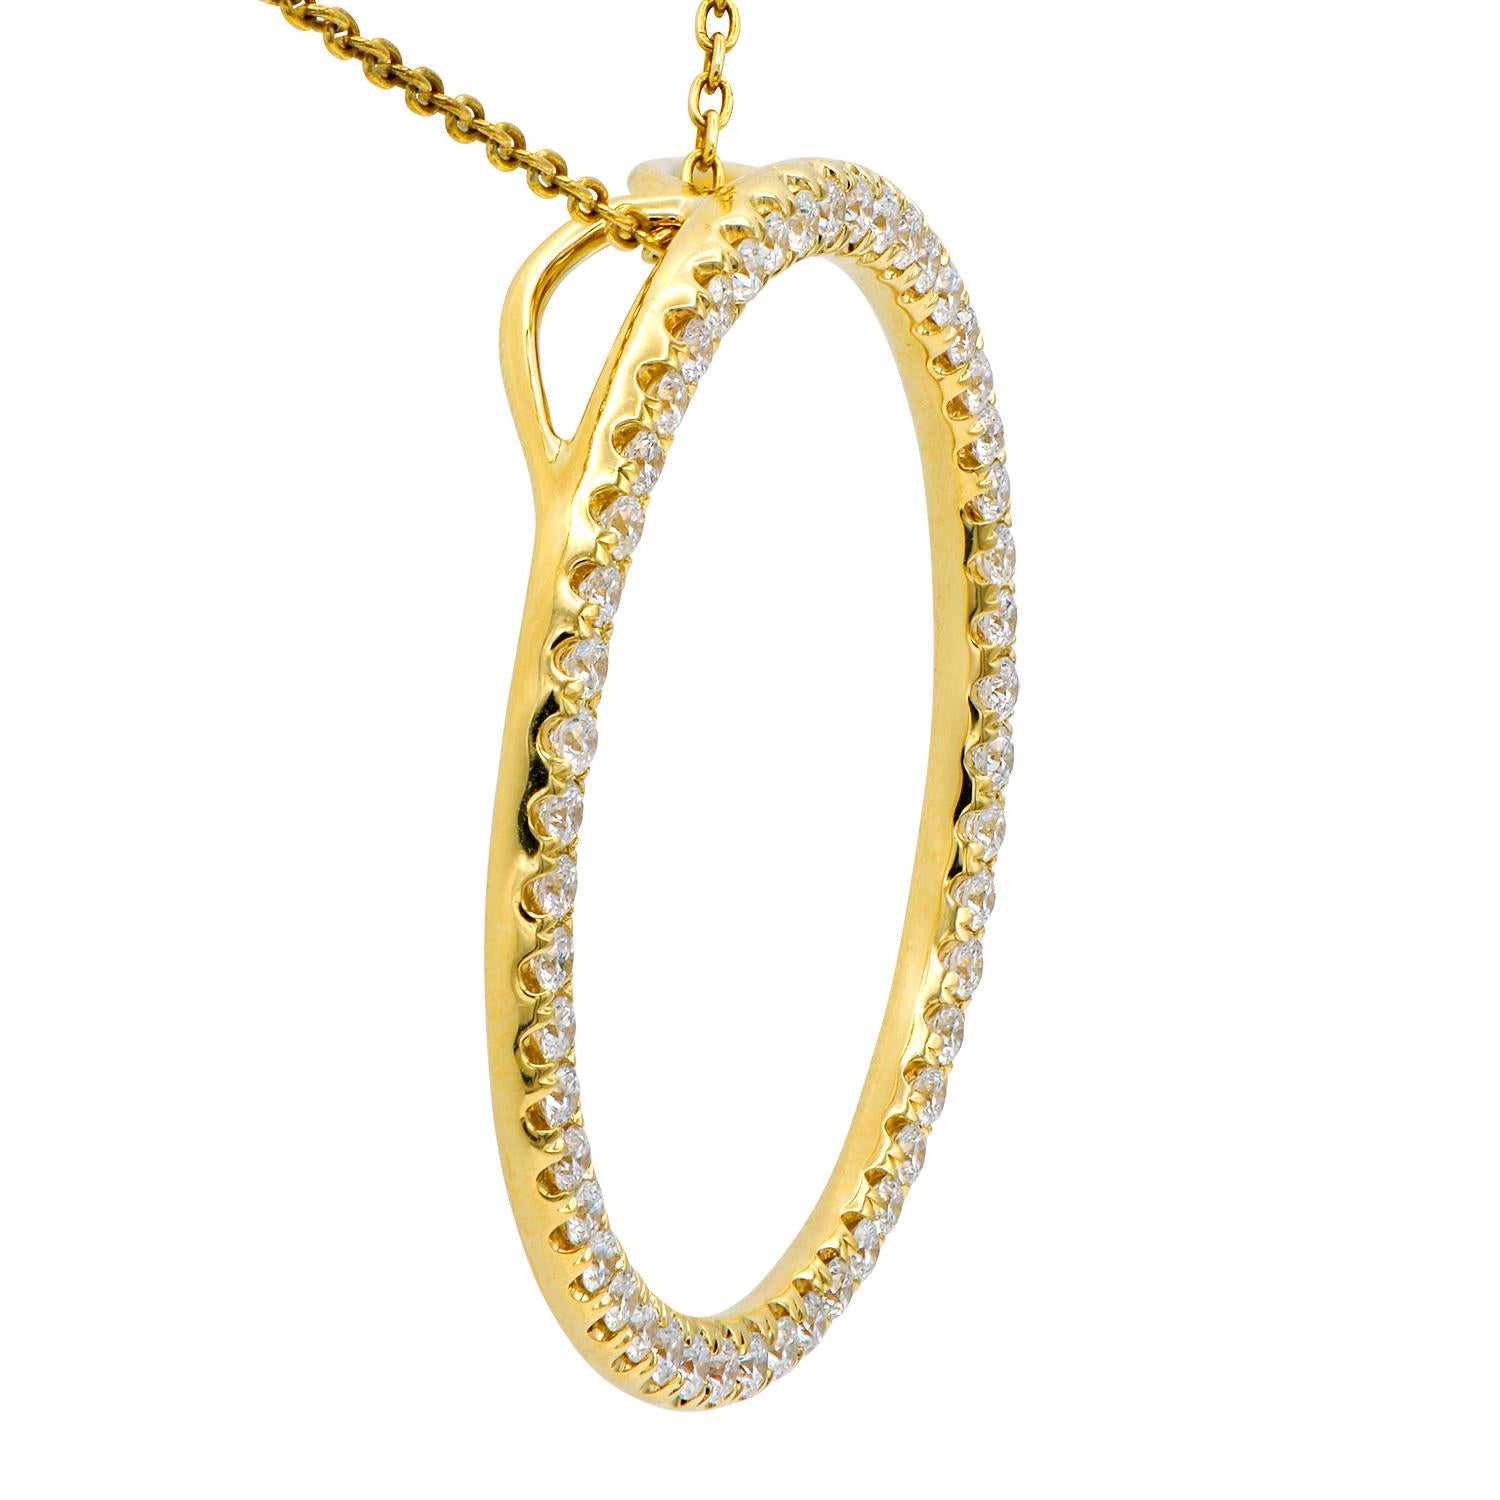 A perfect circle of beautiful sparkling diamonds is the perfect accessory for any occasion. This stunning pendant is made from 4.4 grams of 14 karat yellow gold, which is covered in 50 round VS2, G color diamonds, totaling 0.84 carats. Included is